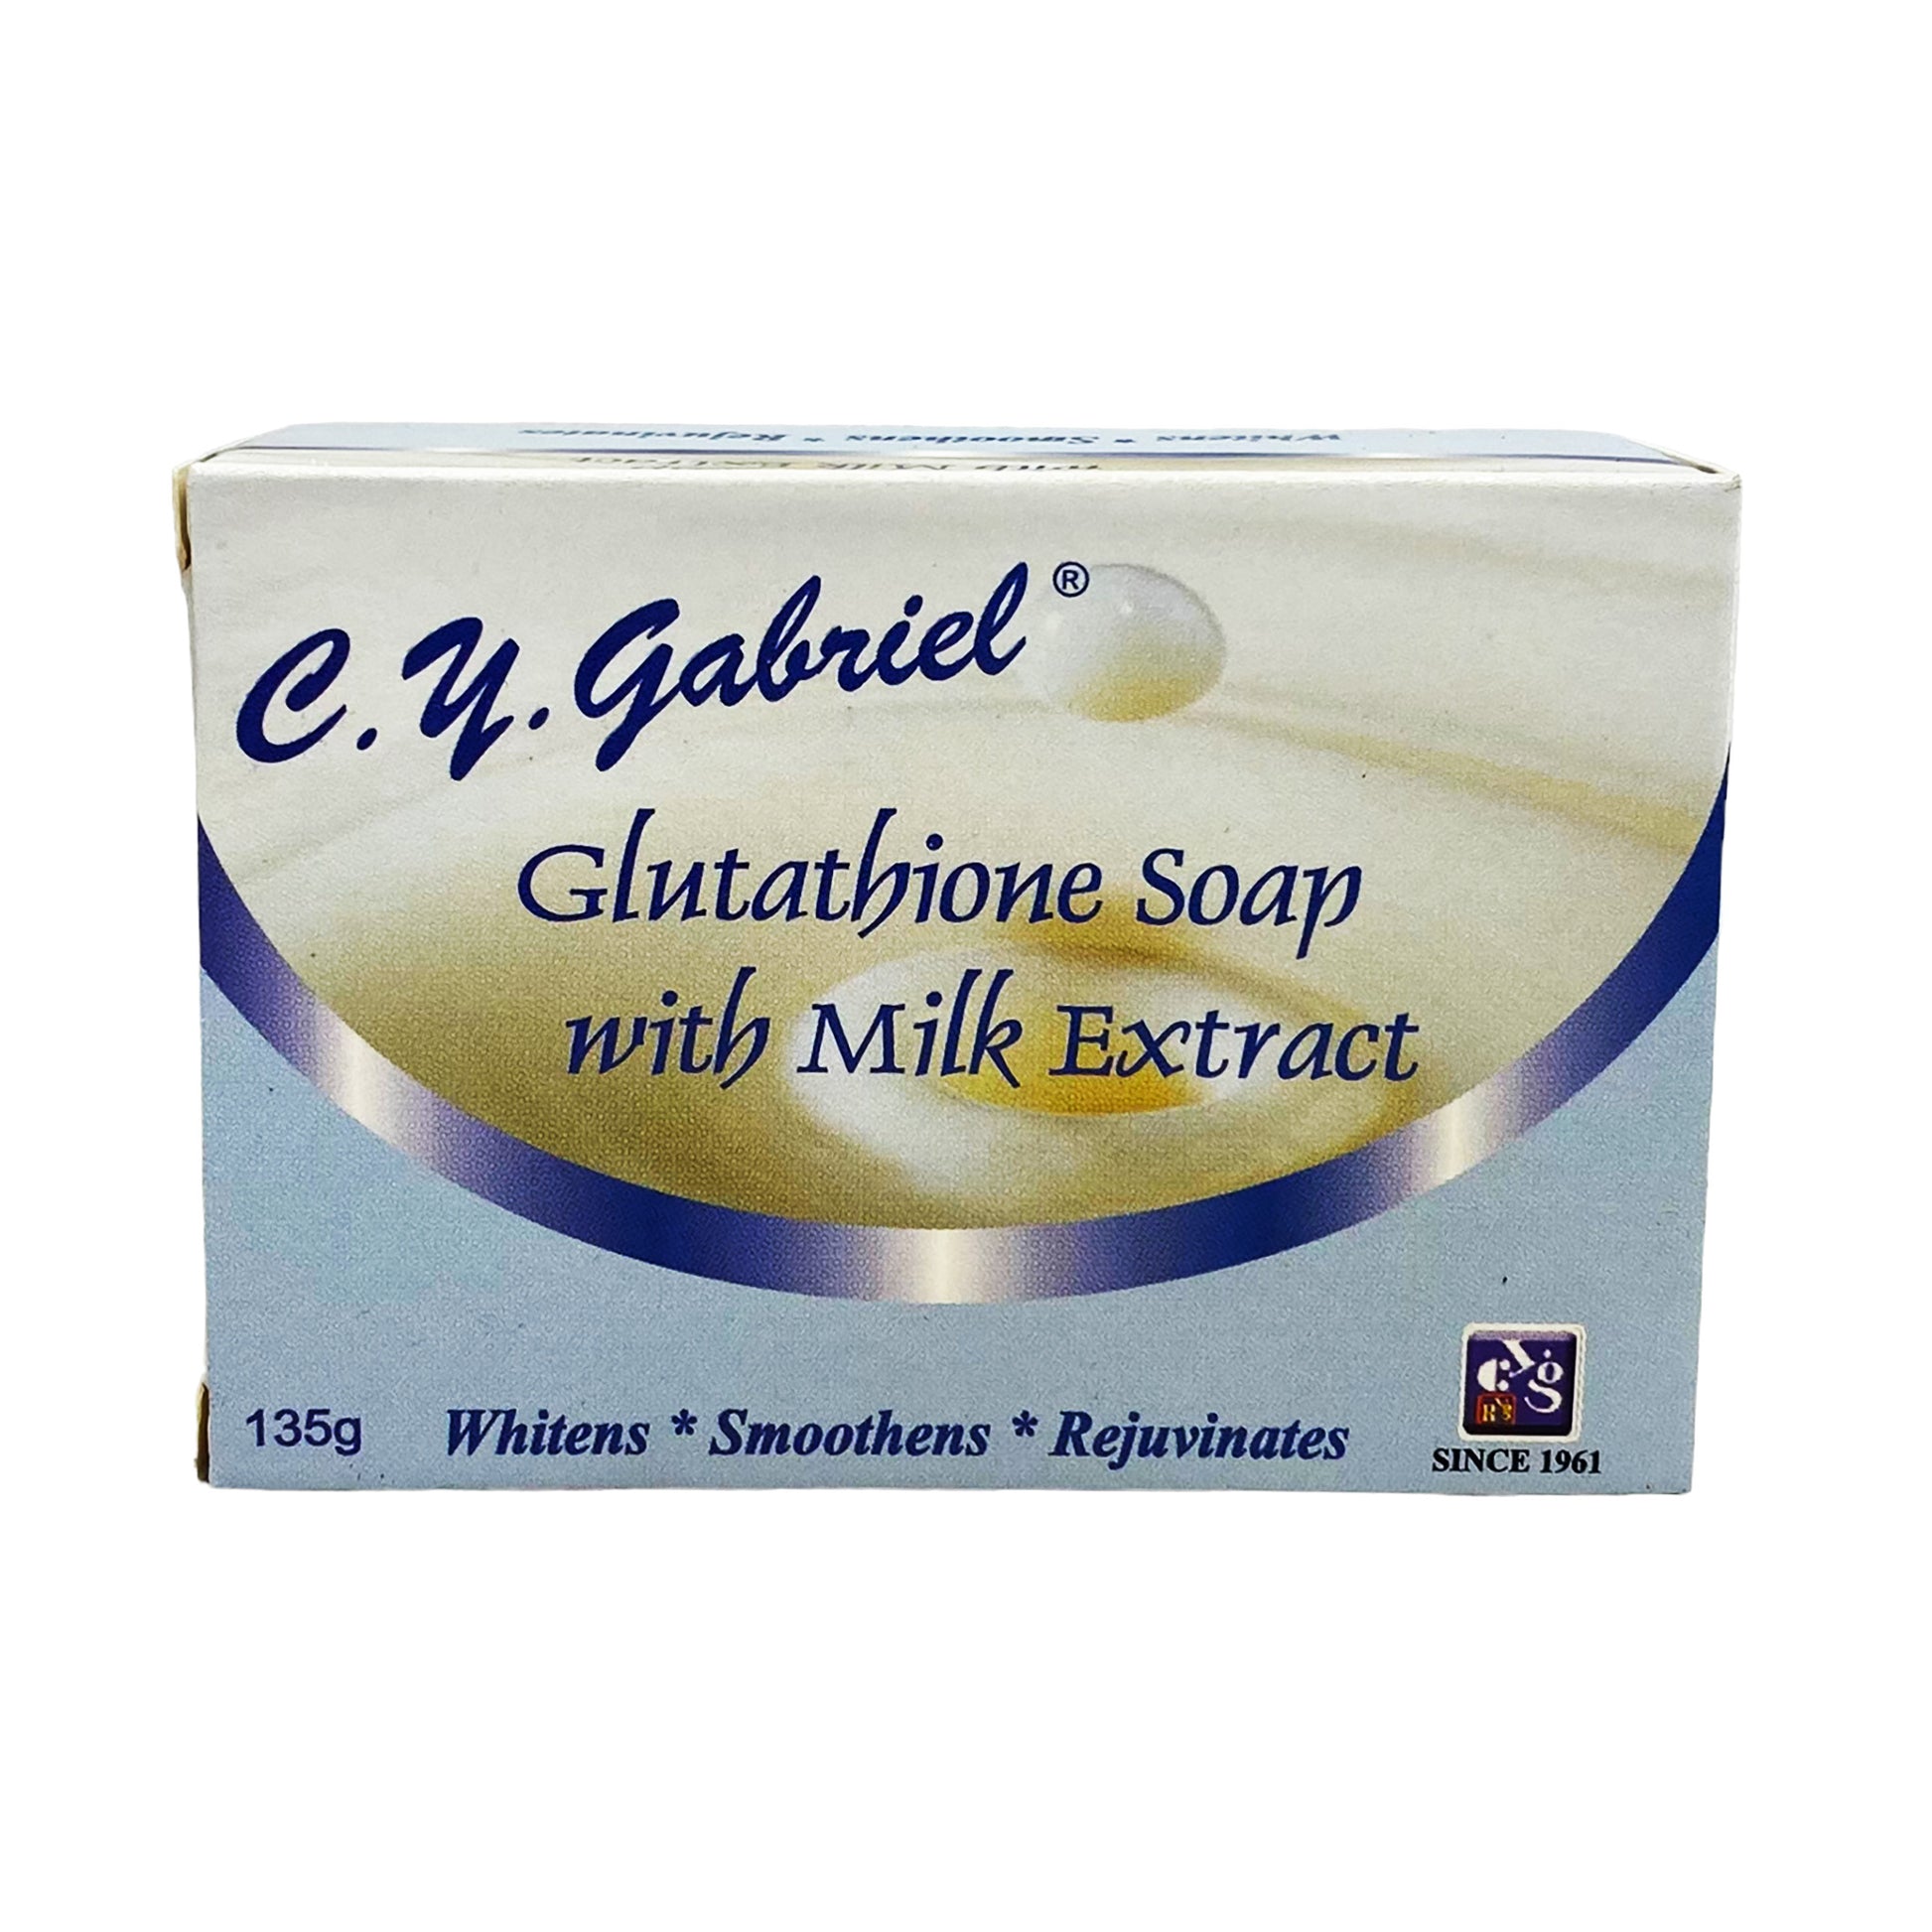 Front graphic view of CY Gabriel Glutathione Soap with Milk Extract 4.76oz (135g)